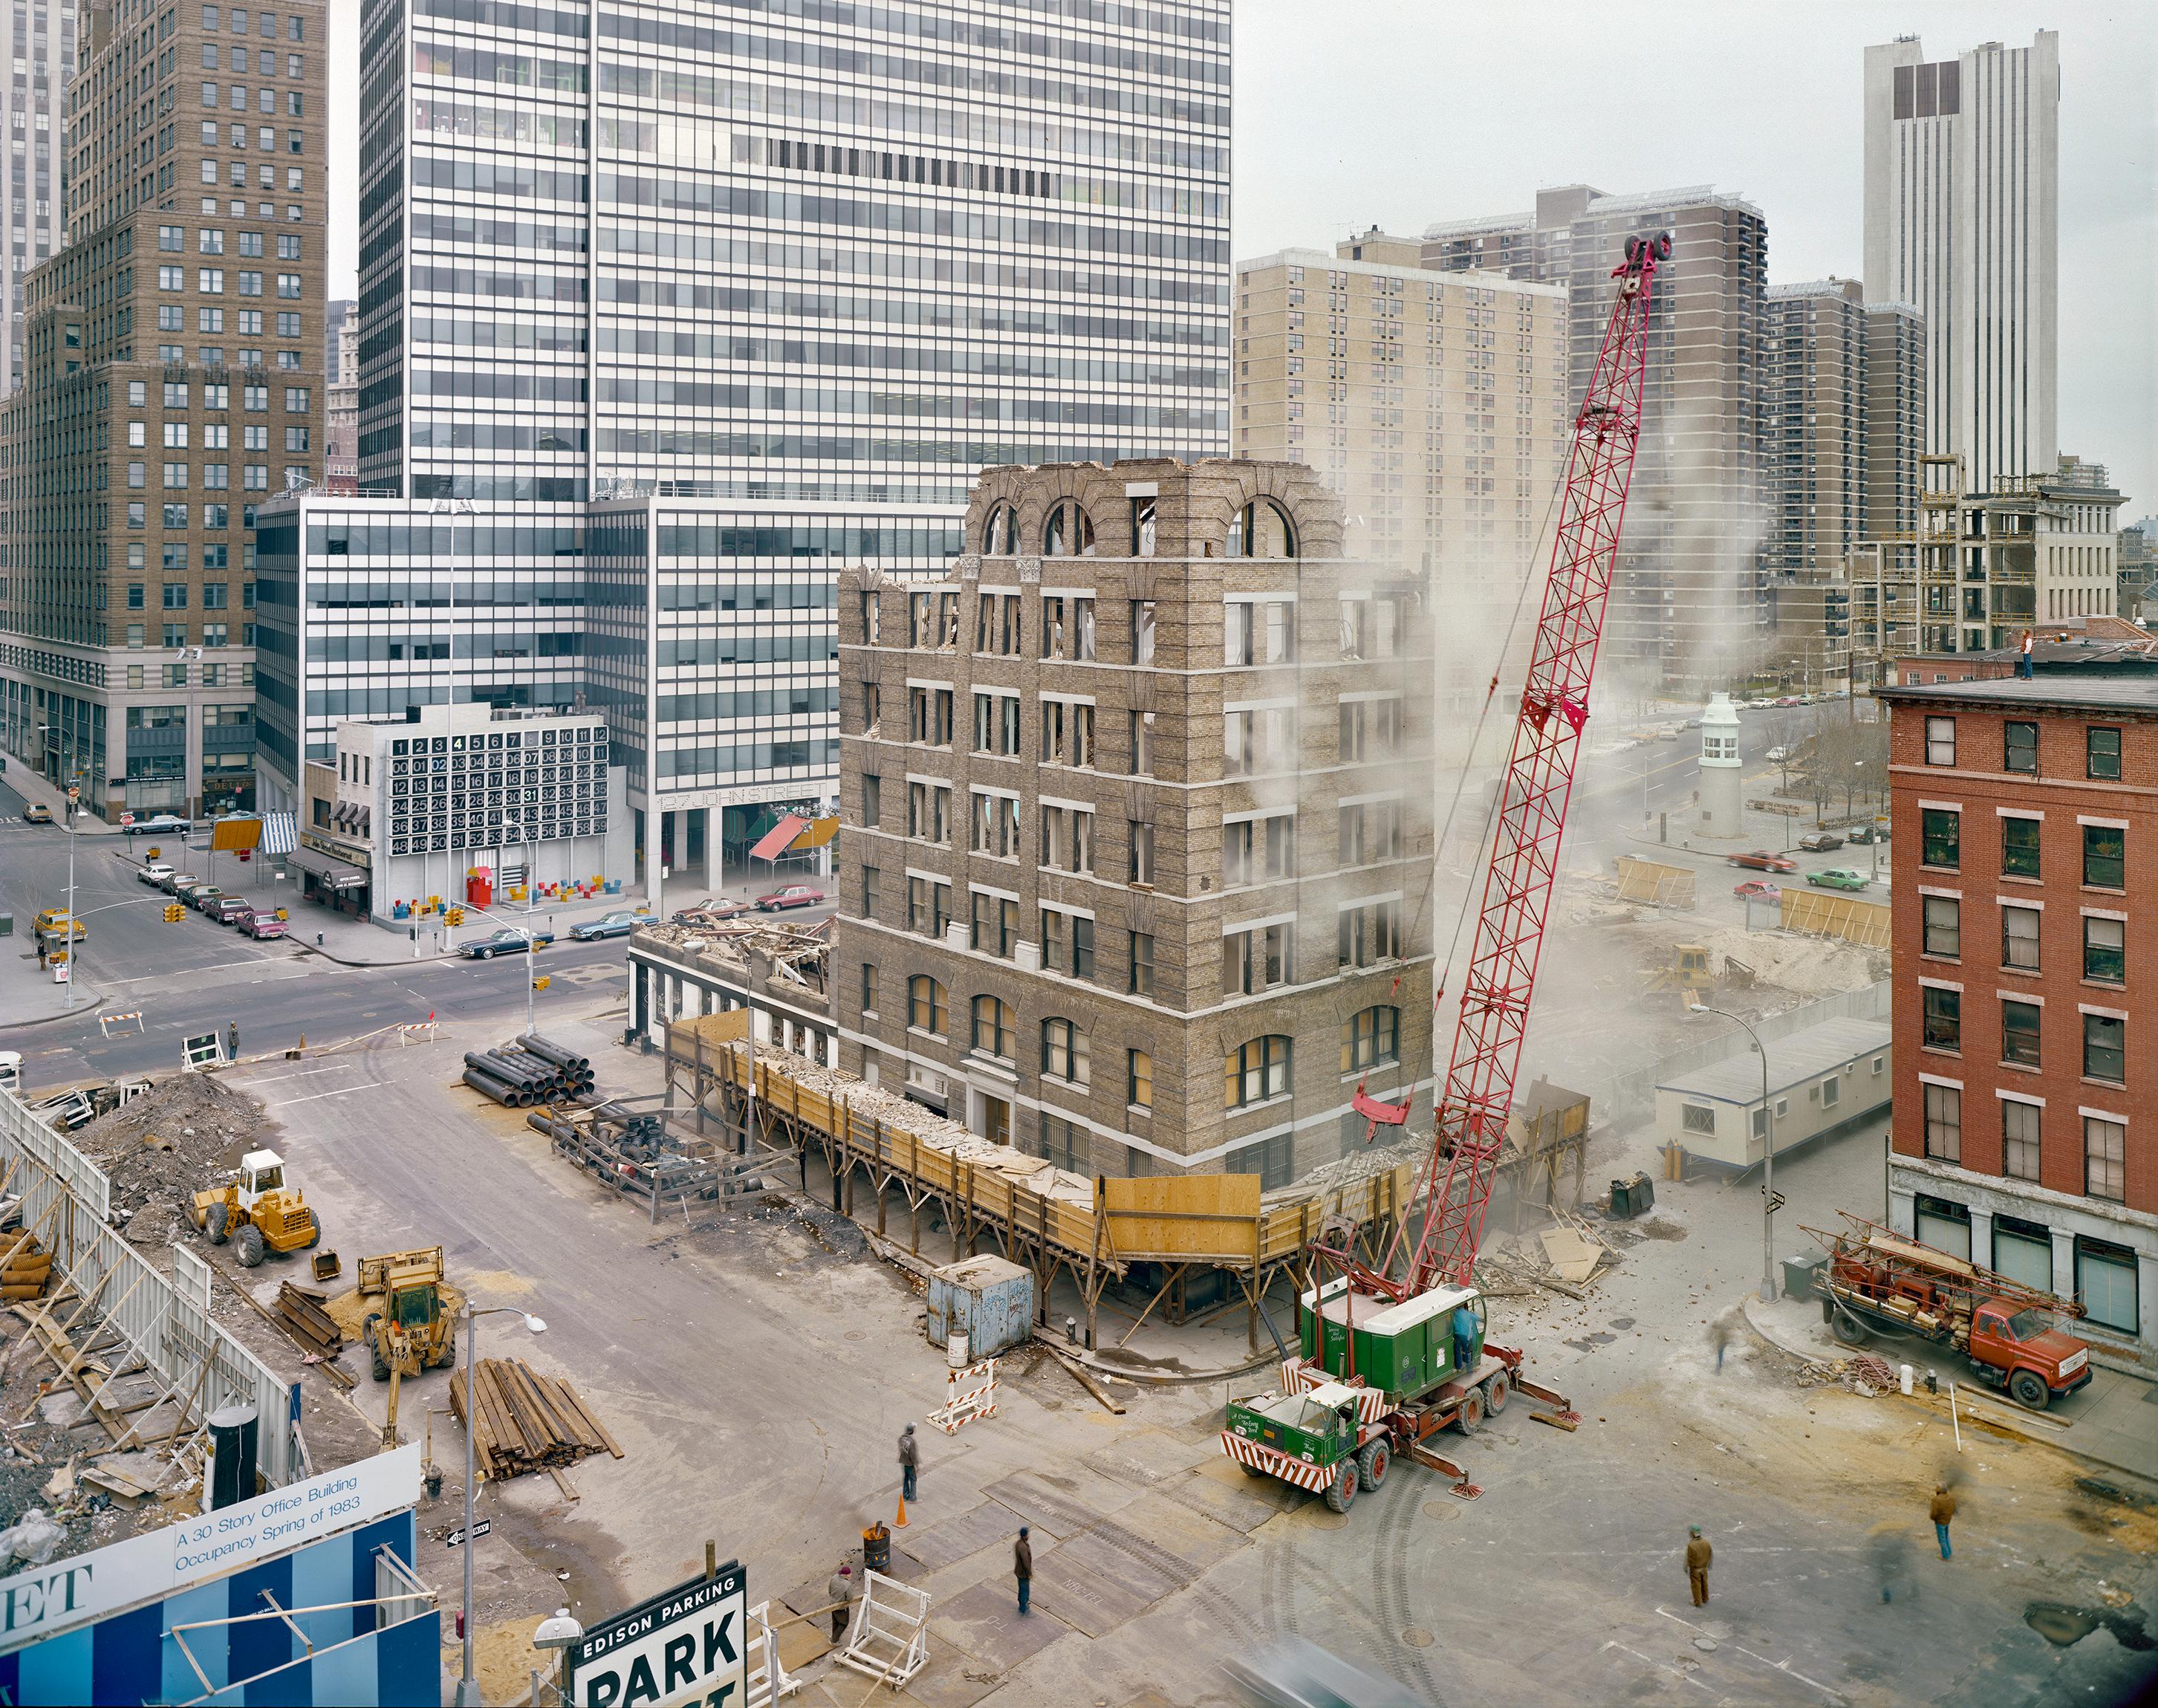 Archival Pigment Print

Lower Manhattan, Seaport renovations..

All available sizes & editions for each size of this photograph:
30" x 40” - Edition of 5 + 2 Artist Proofs
40" X 50"- Edition of 5 + 2 Artist Proofs
50" X 60"-  Edition of 5 + 2 Artist